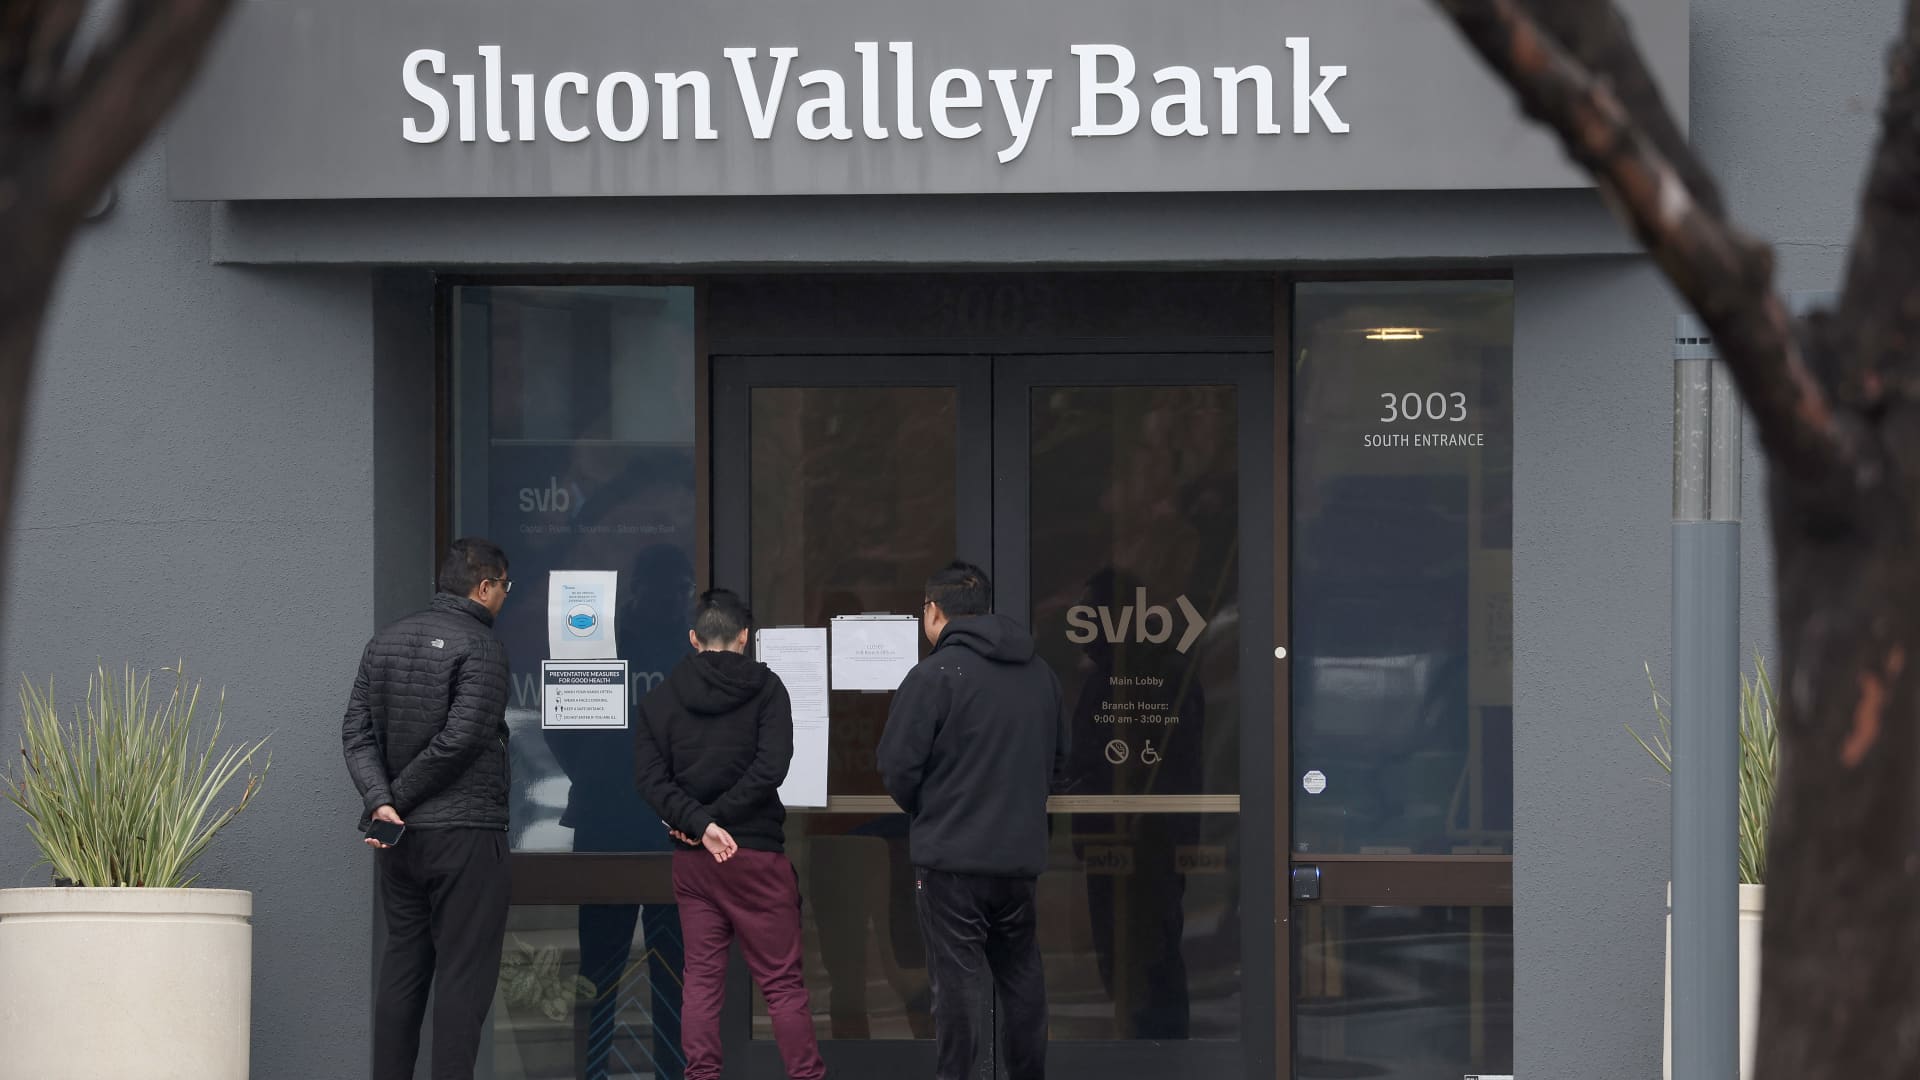 GOP presidential contenders cast blame for Silicon Valley Bank collapse